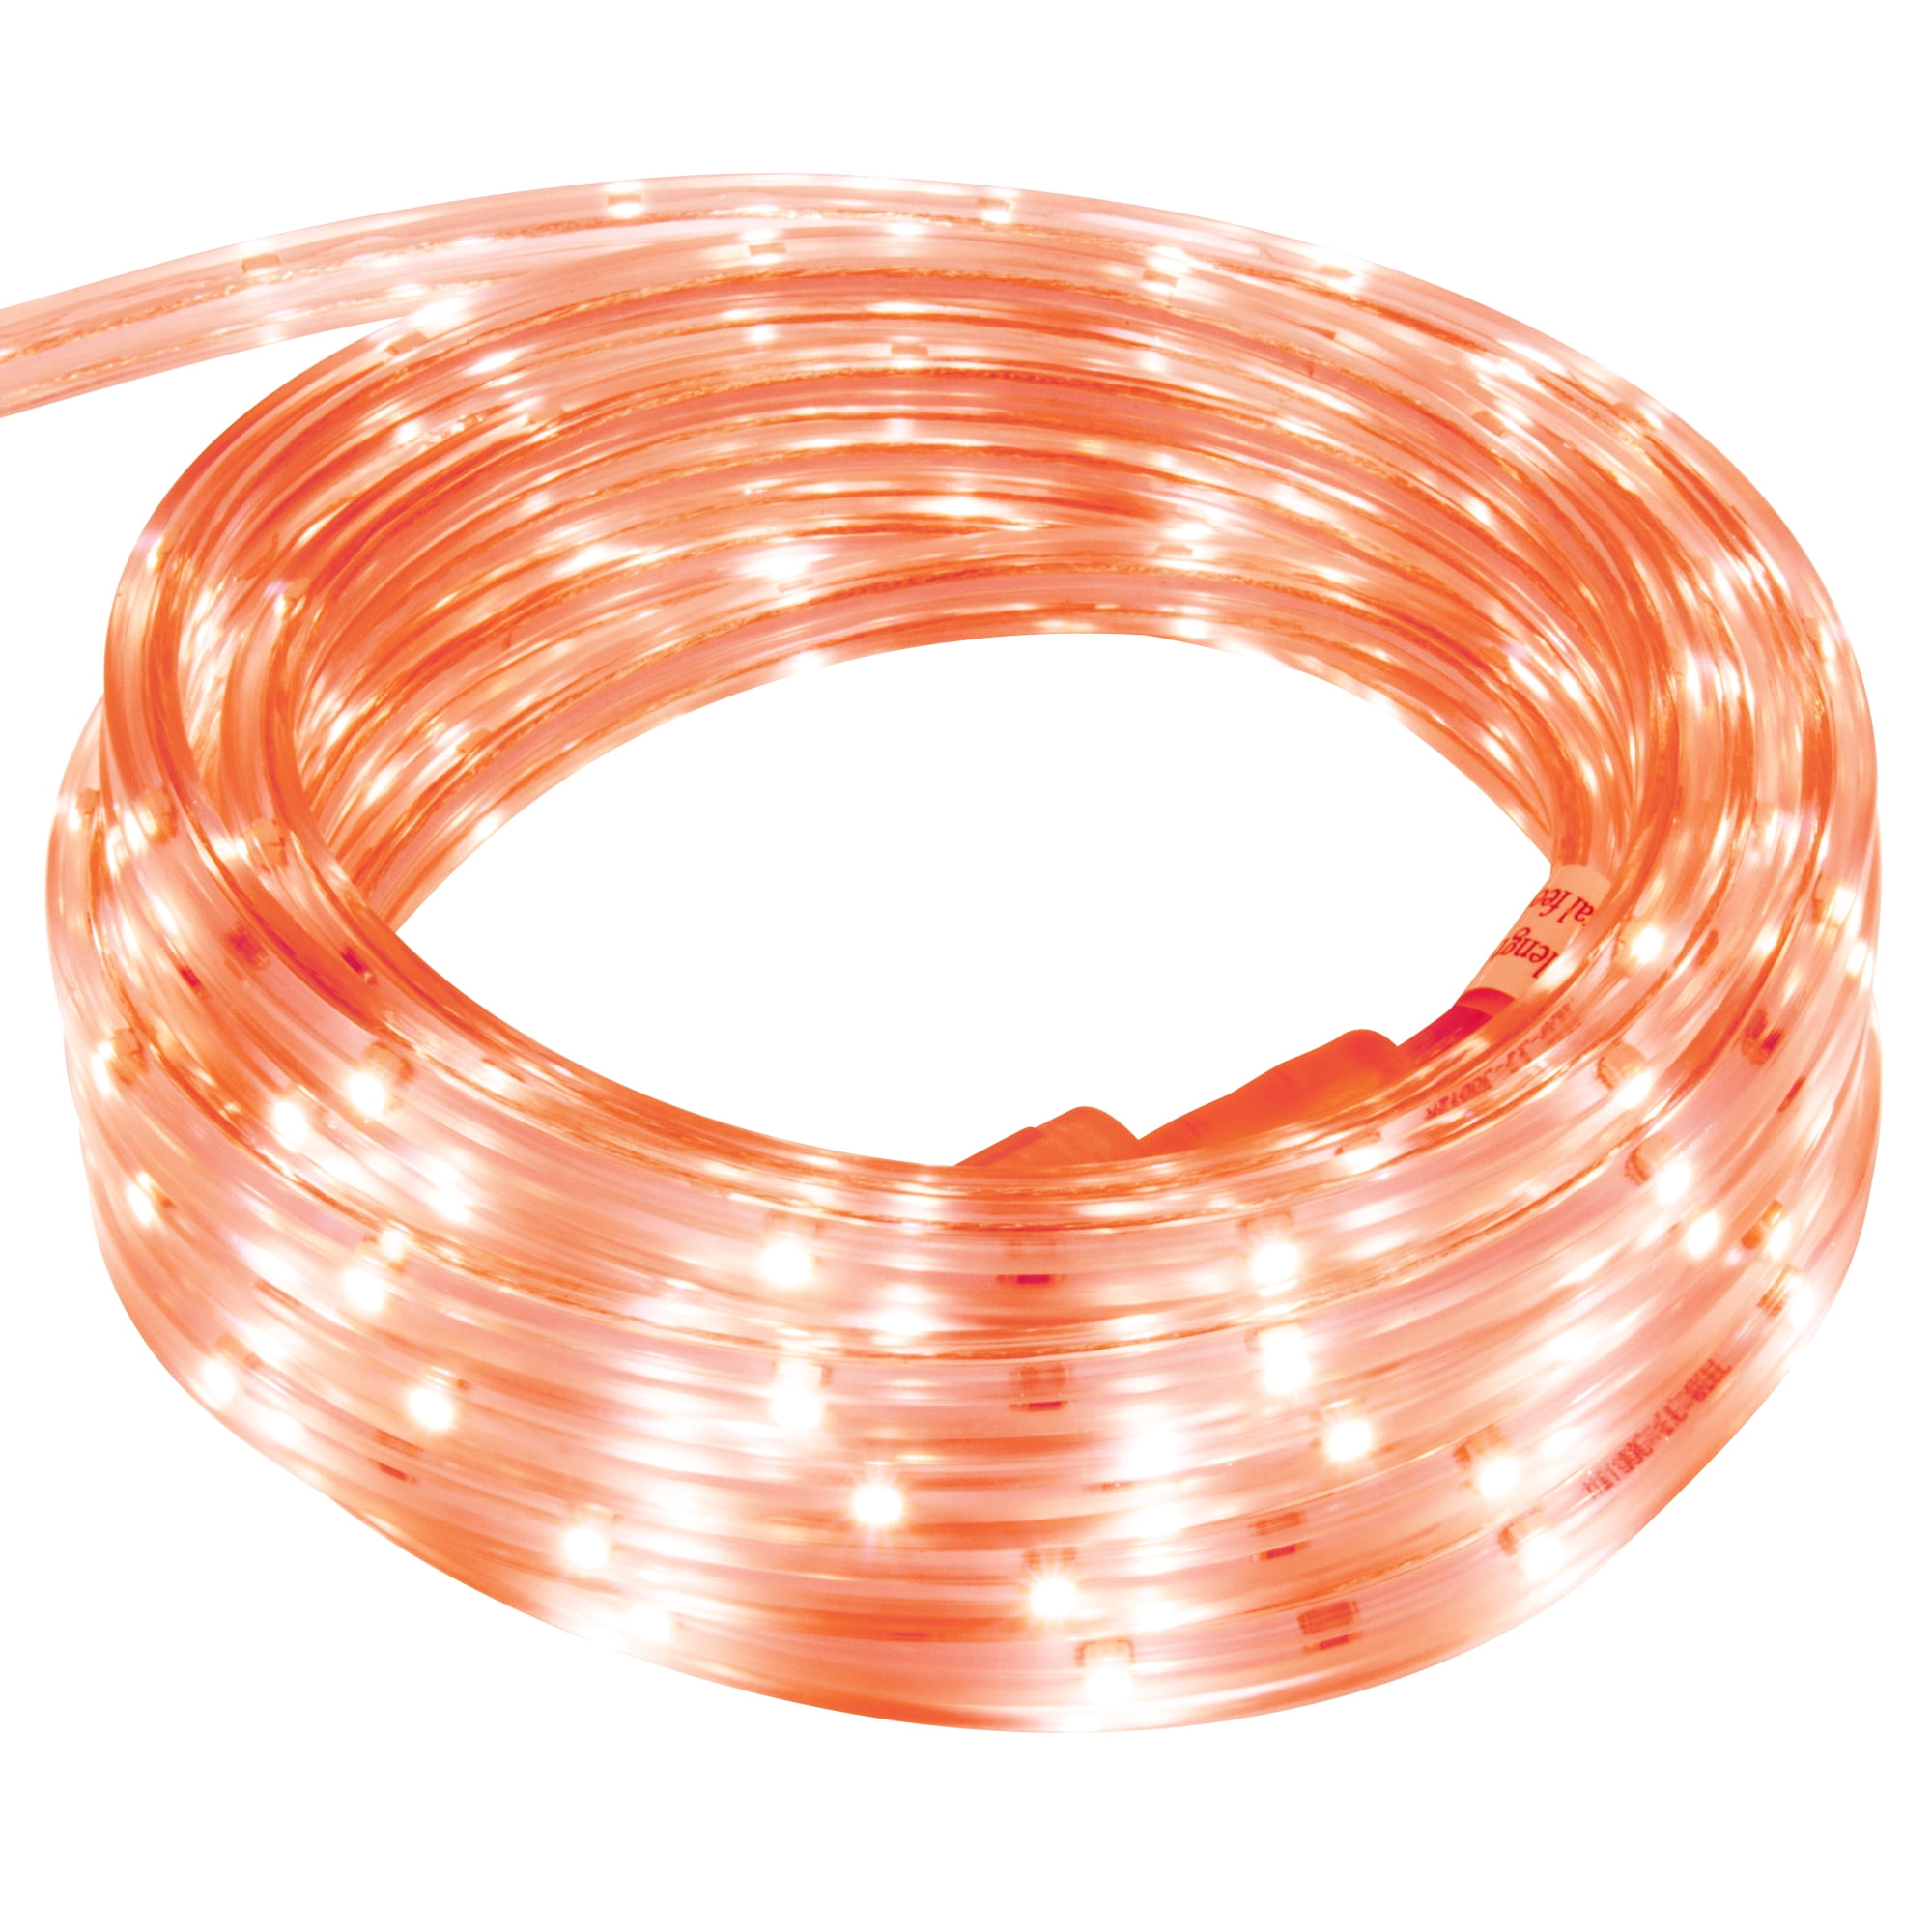 Static/Sequence Home Garden Led Tubular Rope Lighting Choice of Colours